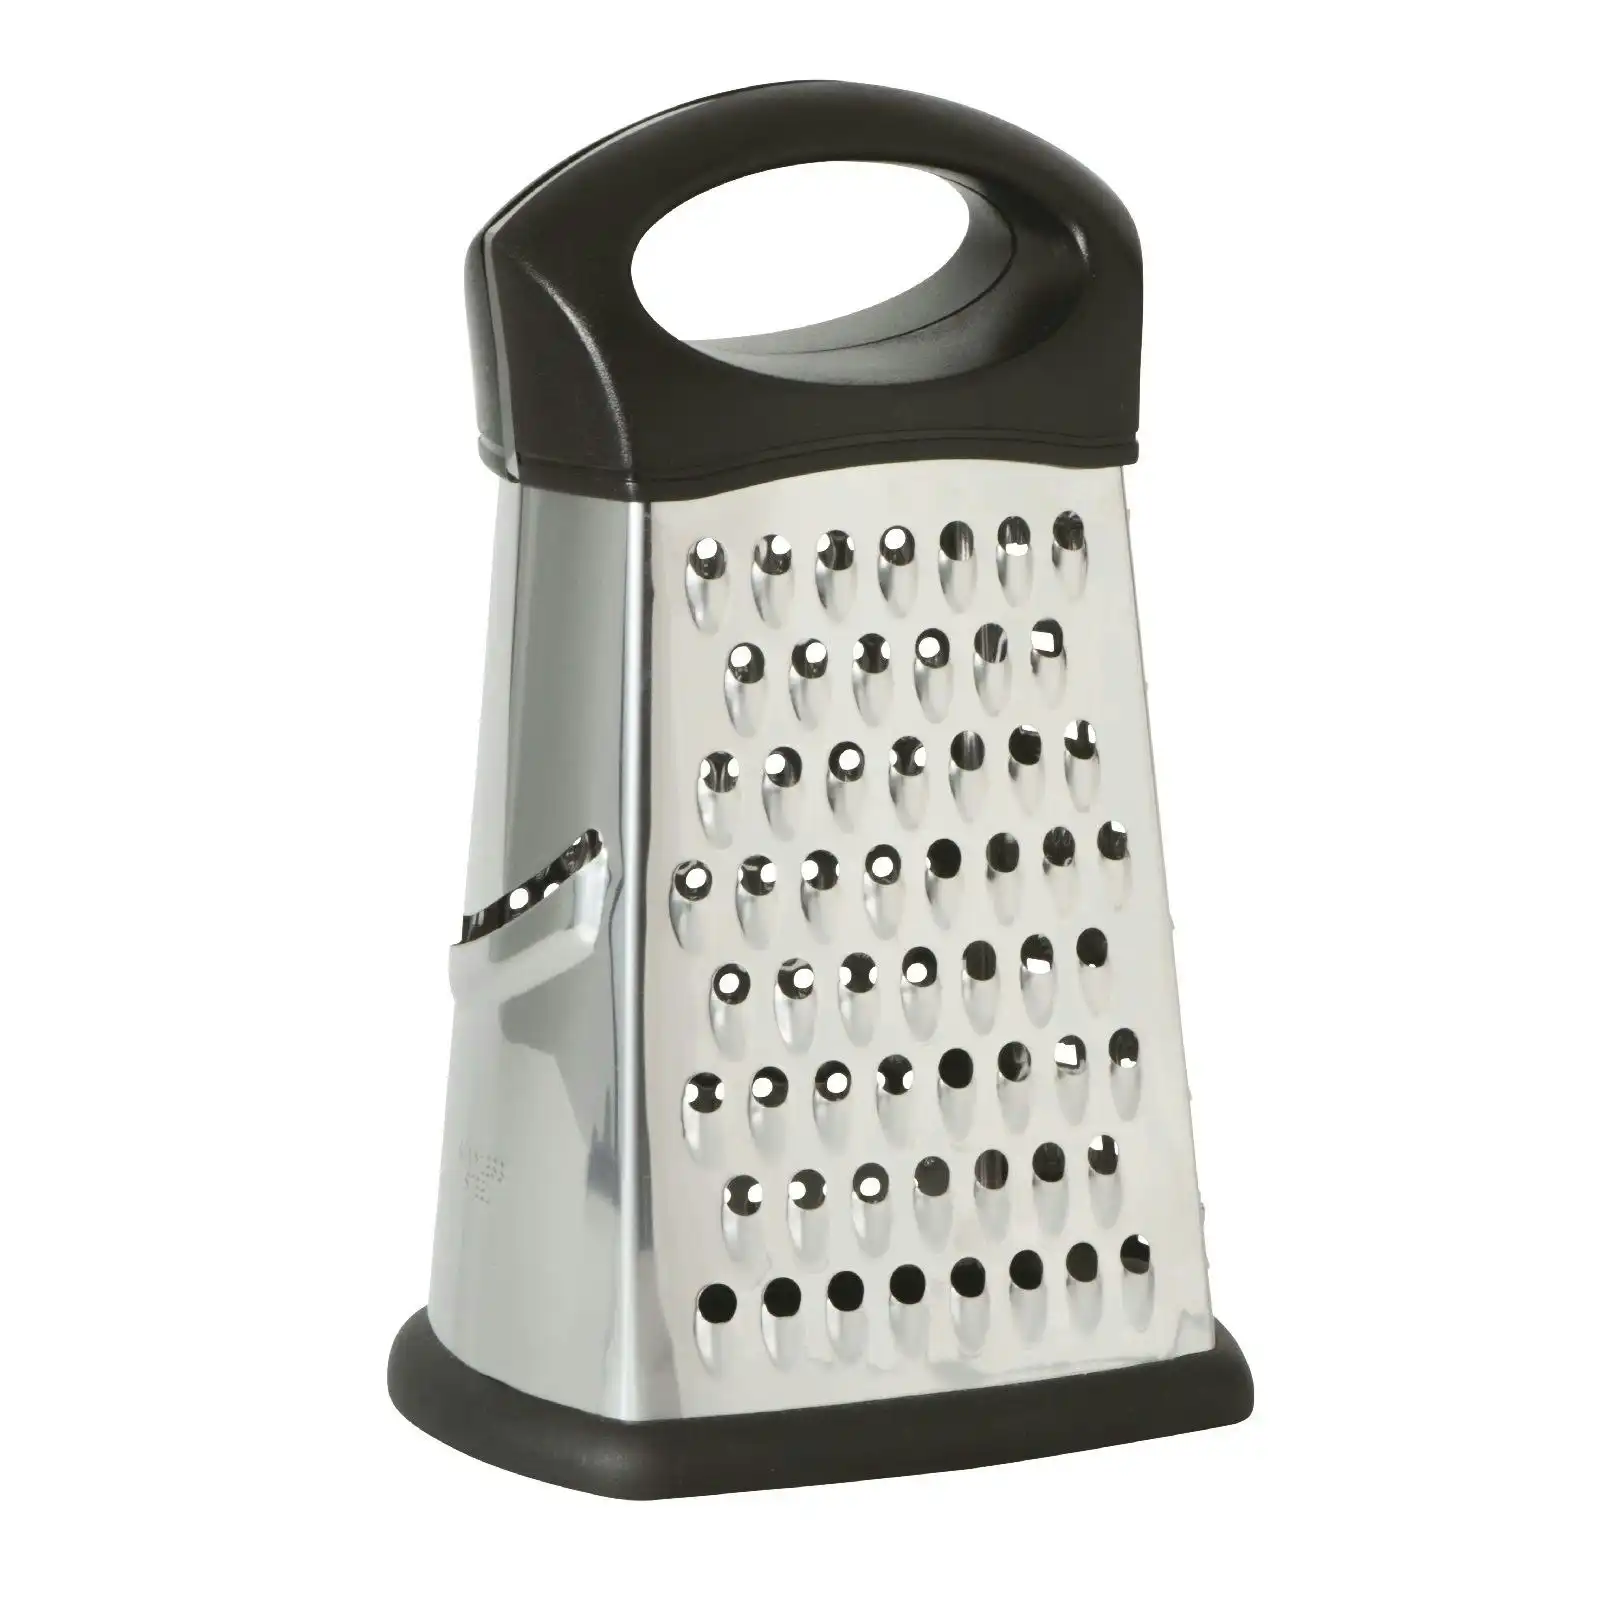 Avanti 4 Sided Box Grater Stainless Steel